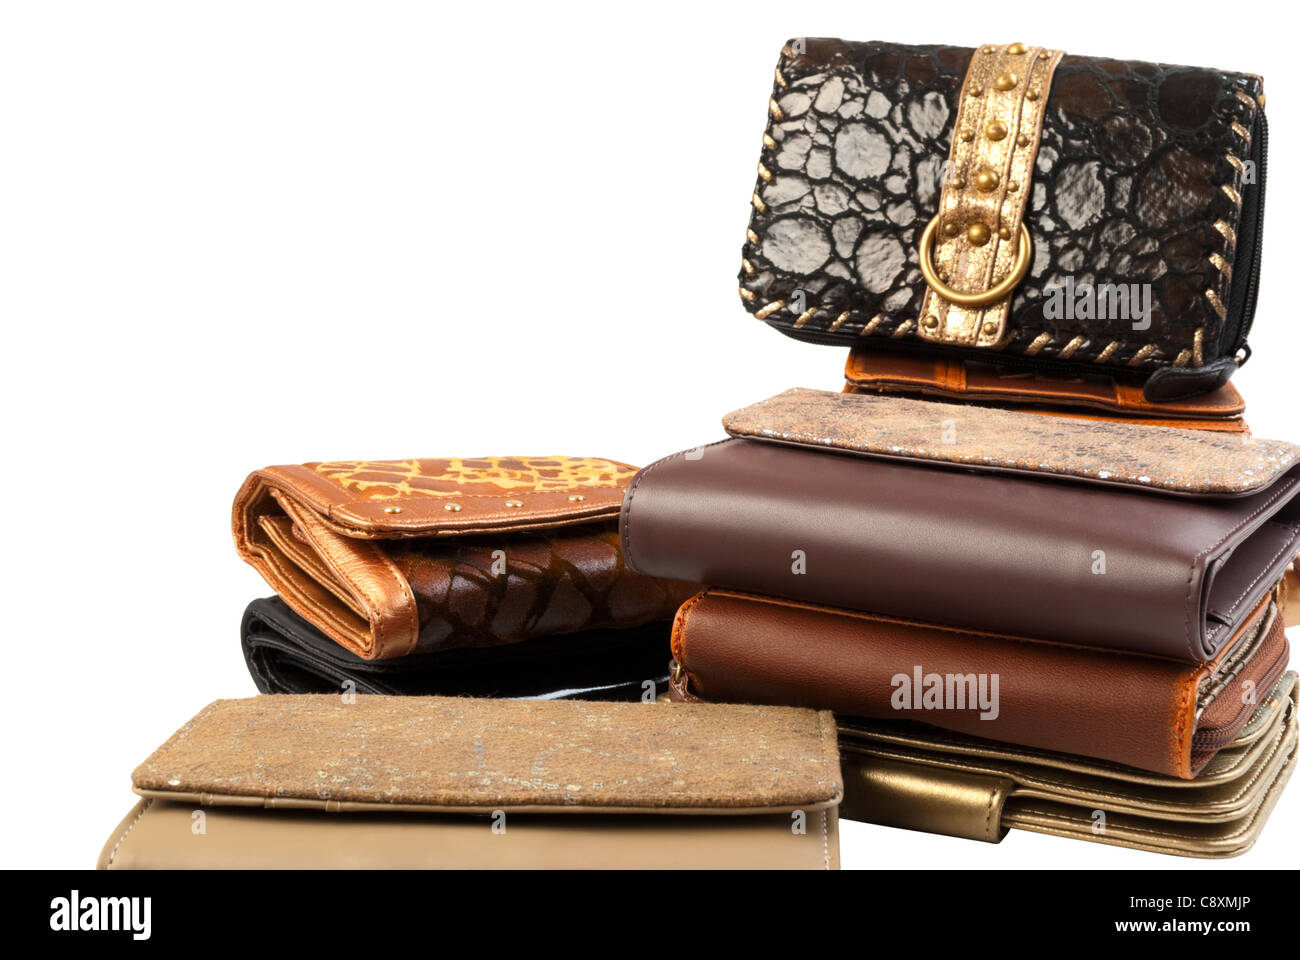 10 leather purses in stack. Isolated on white background Stock Photo